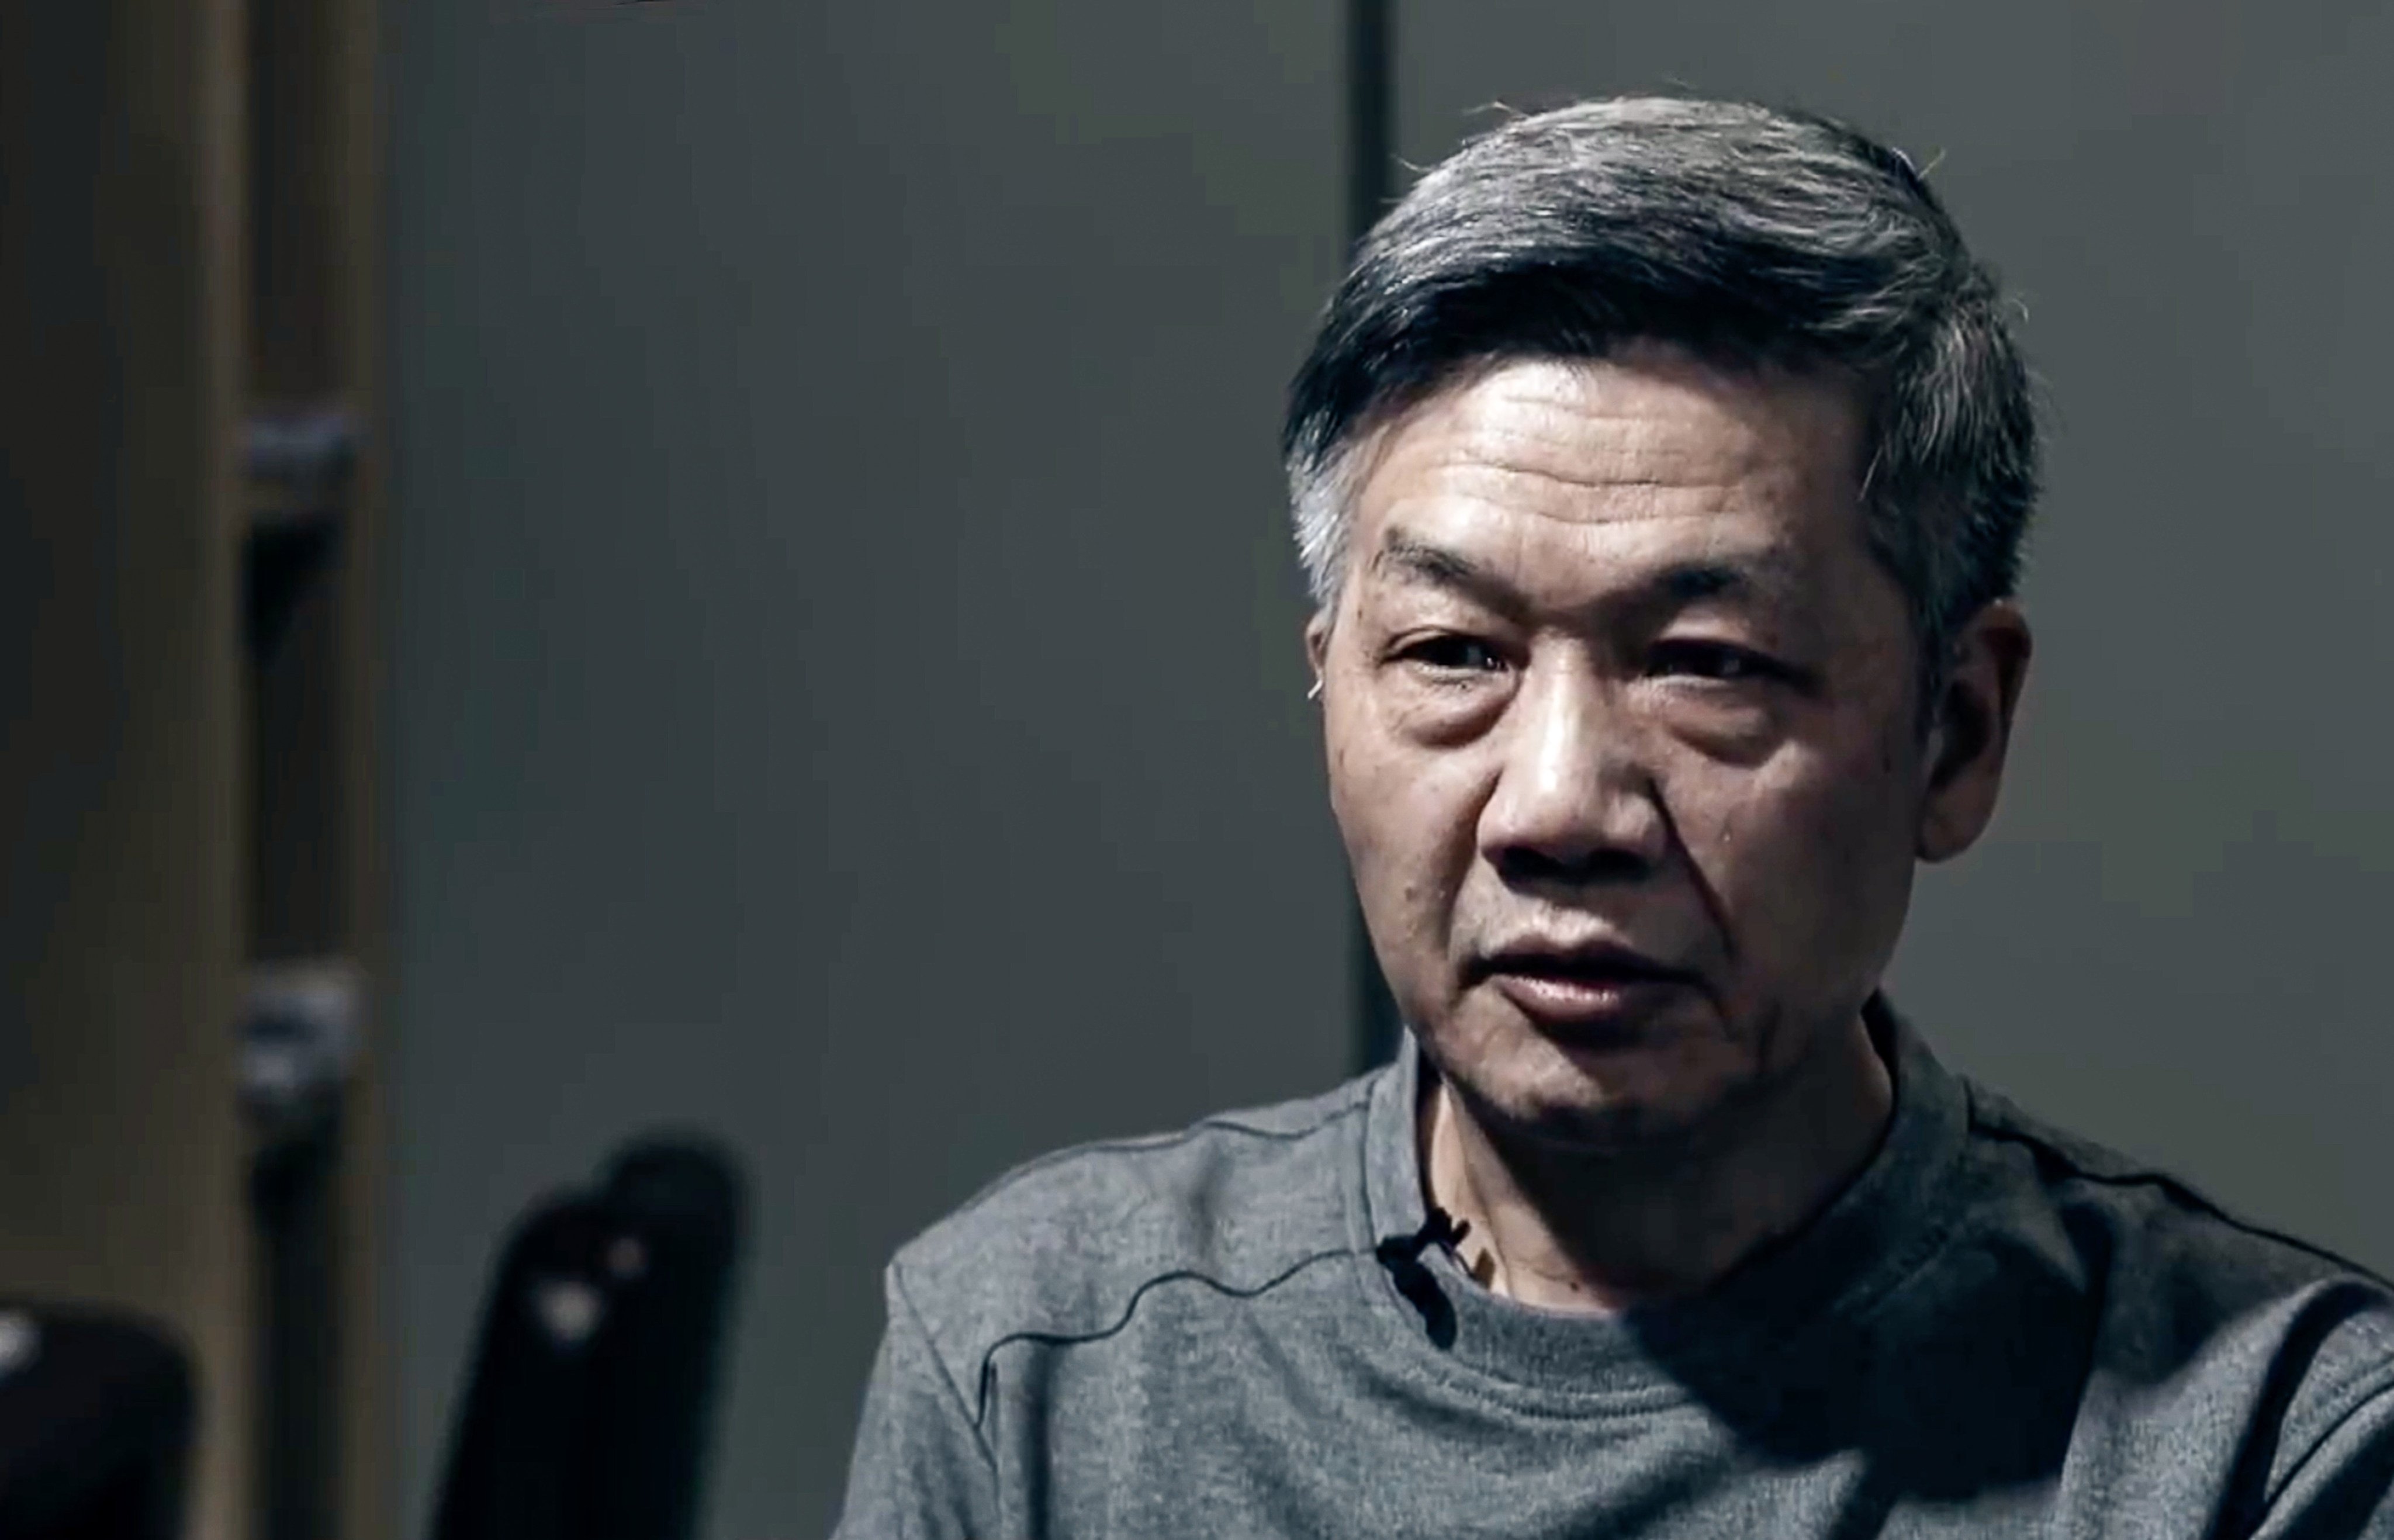 Former Guizhou official Li Zaiyong confessed to misusing public funds in a documentary broadcast on state TV. Photo: CCTV